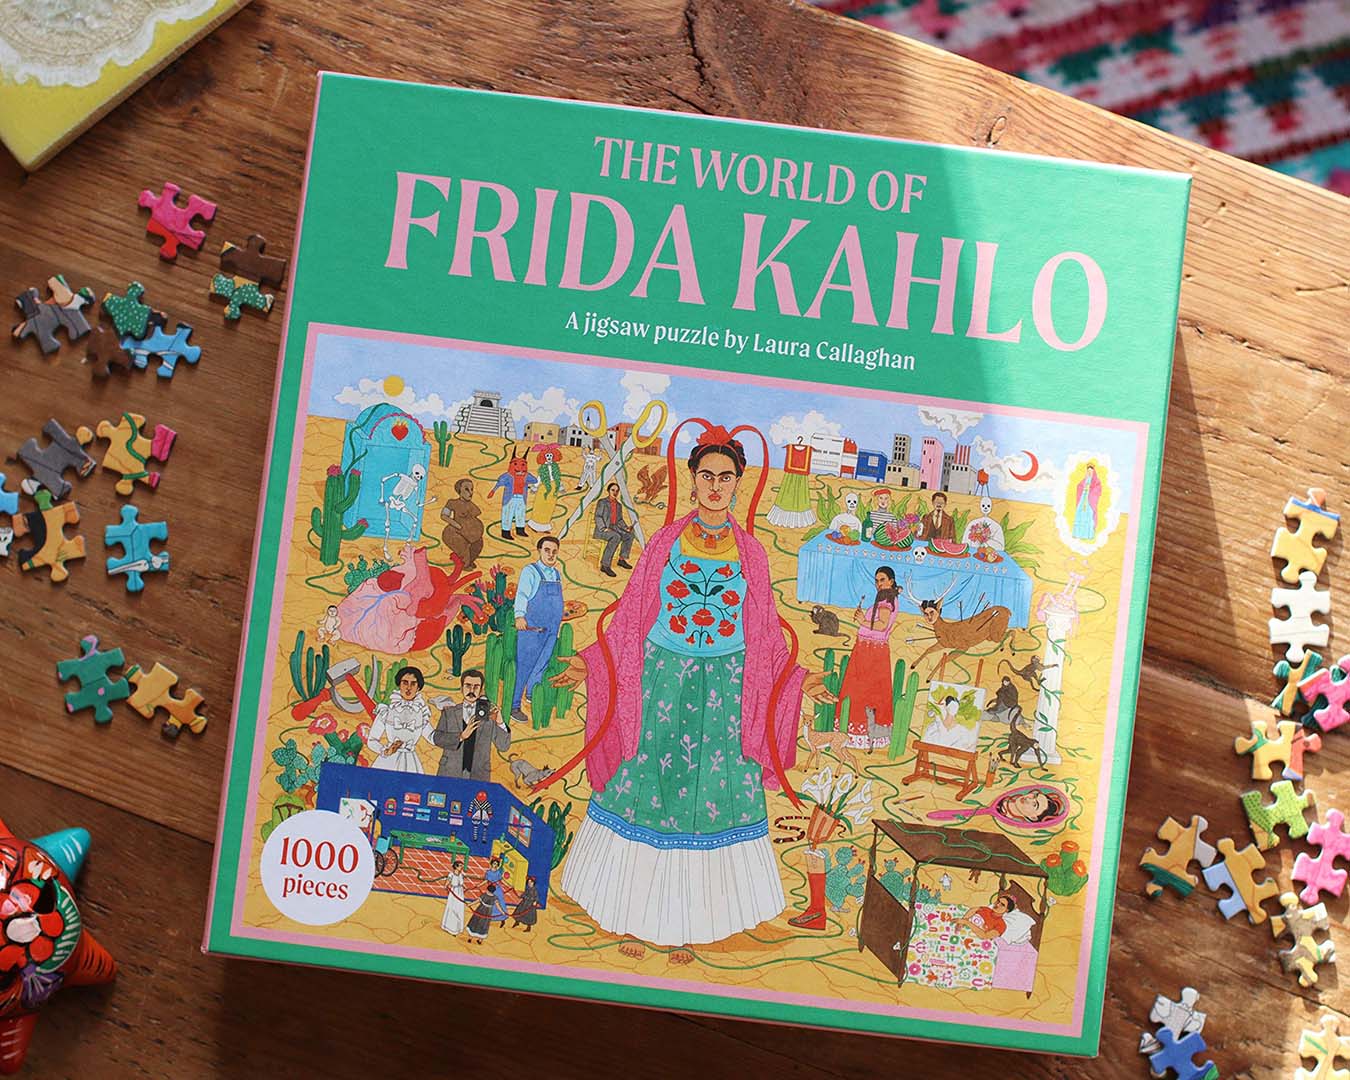 A puzzle box, featuring an illustration of Frida Kahlo, sits on wooden table with a few pieces scattered around.